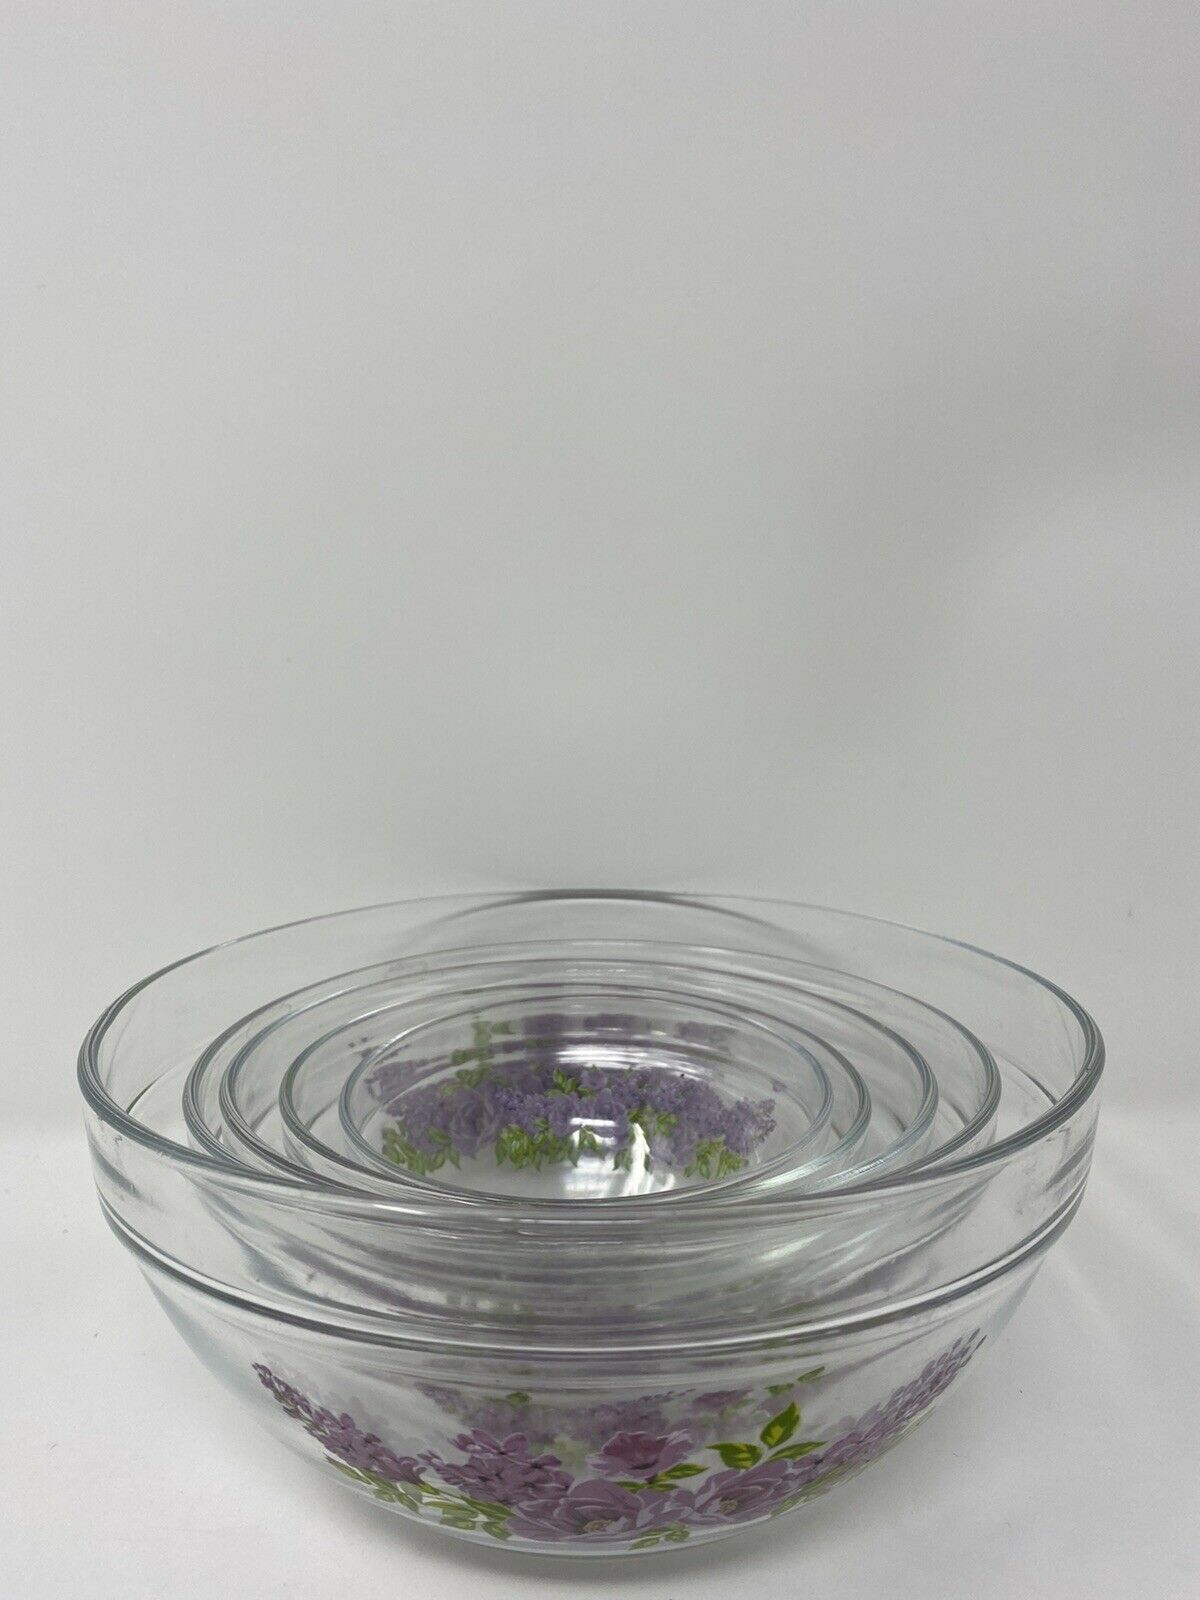 Durable Heat Resistant 5 Glass Stacking Bowls With Purple Flower Design